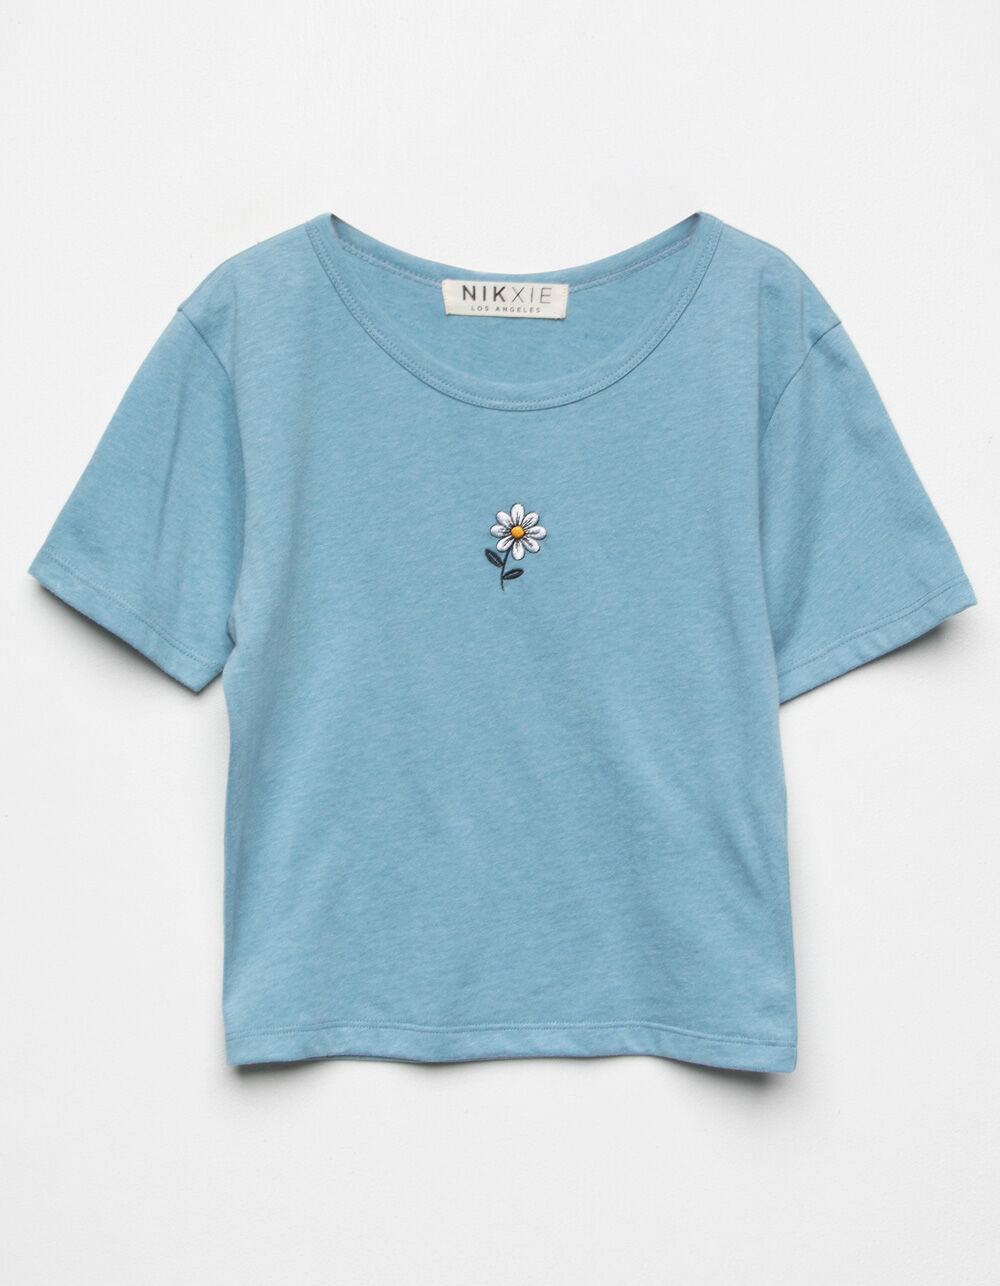 WHITE FAWN Embroidered Sunflower Girls Baby Tee - LIGHT BLUE | Tillys